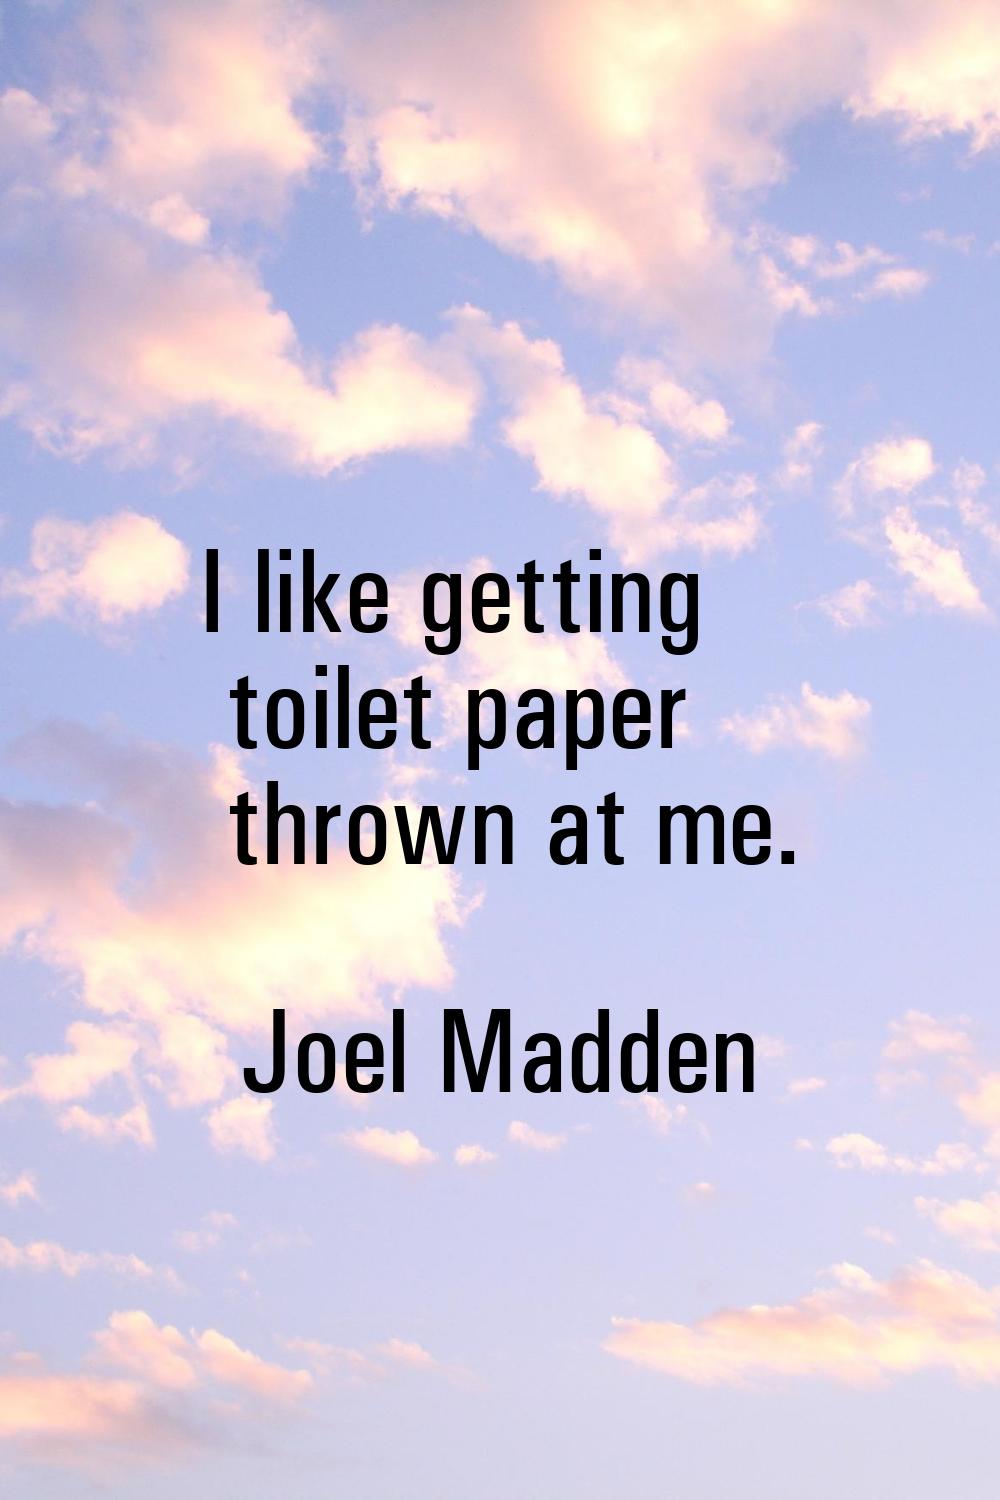 I like getting toilet paper thrown at me.